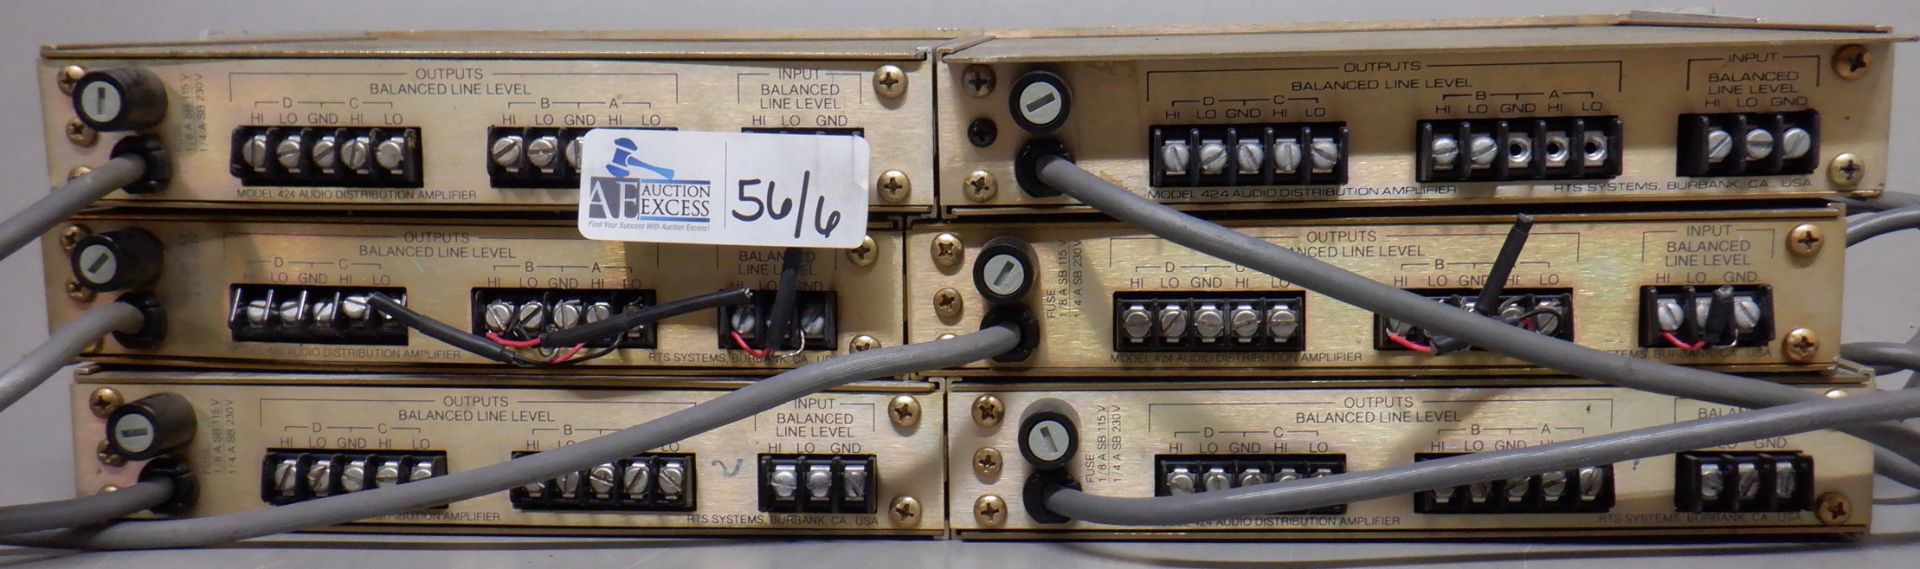 LOT OF 6 RTS SYSTEMS MODEL 424 - Image 2 of 2